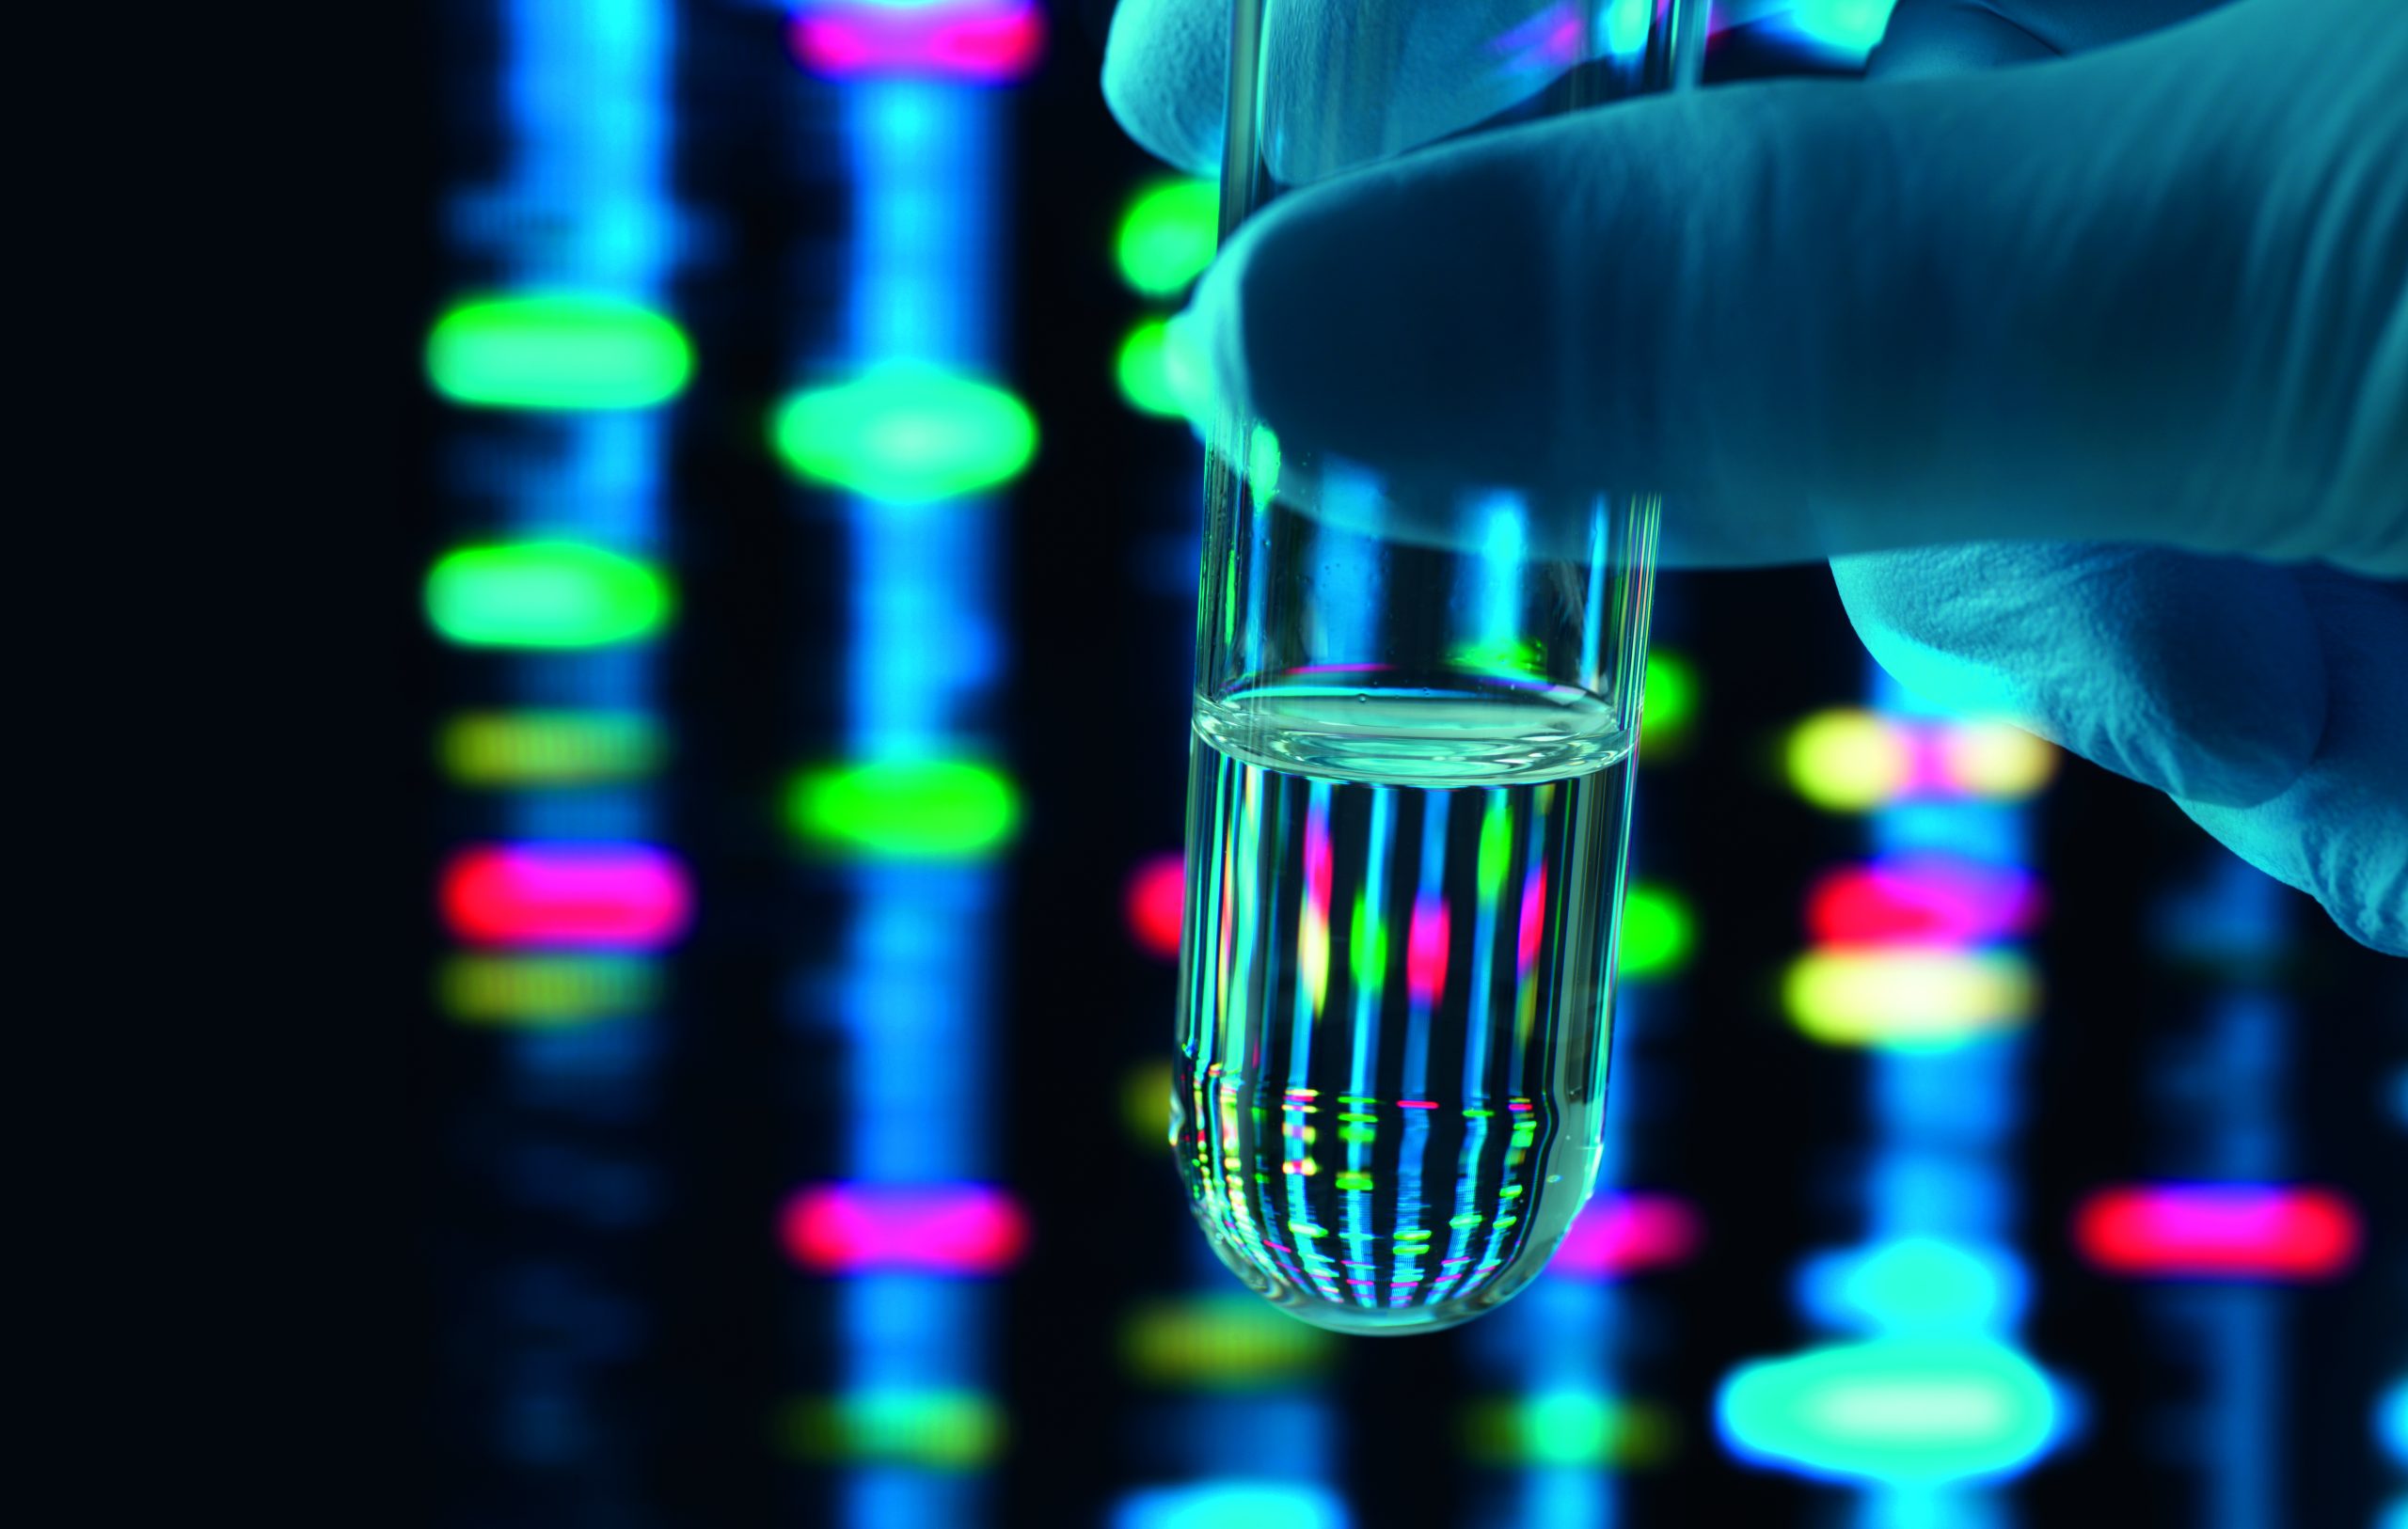 Genetic Research, DNA profile reflected in a test tube containing a sample